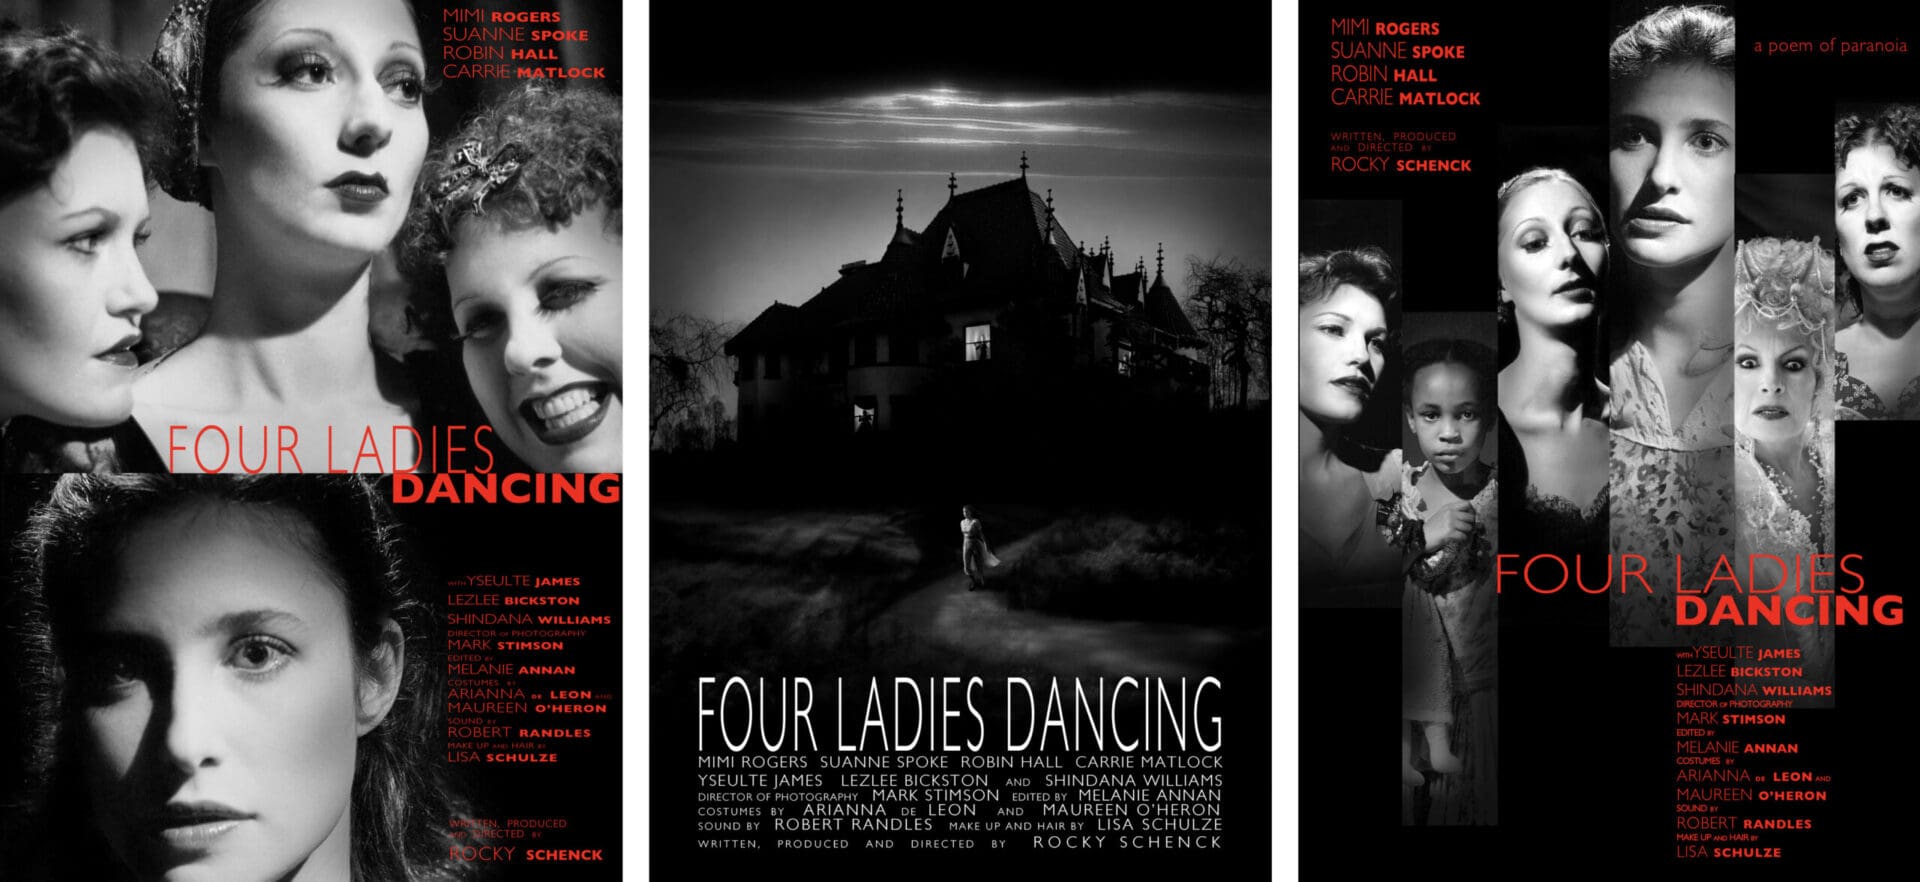 A poster of a play called Four Ladies Dancing.